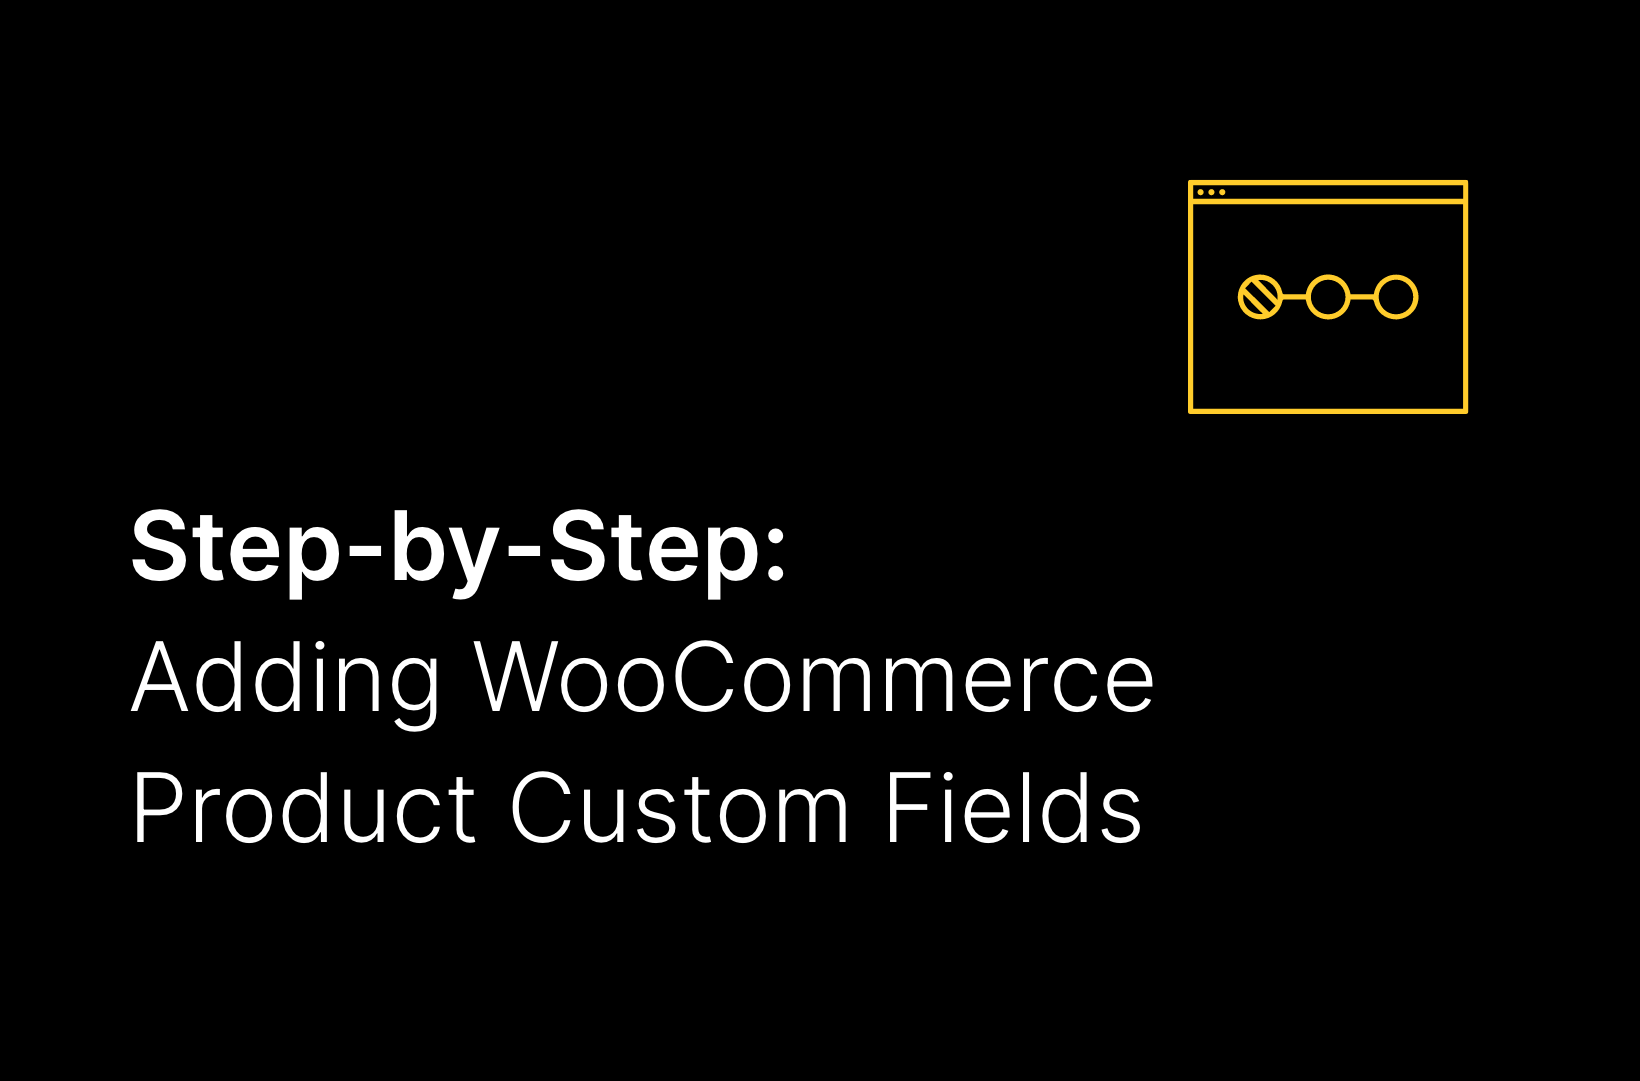 Step-by-Step: How to Add WooCommerce Product Custom Fields